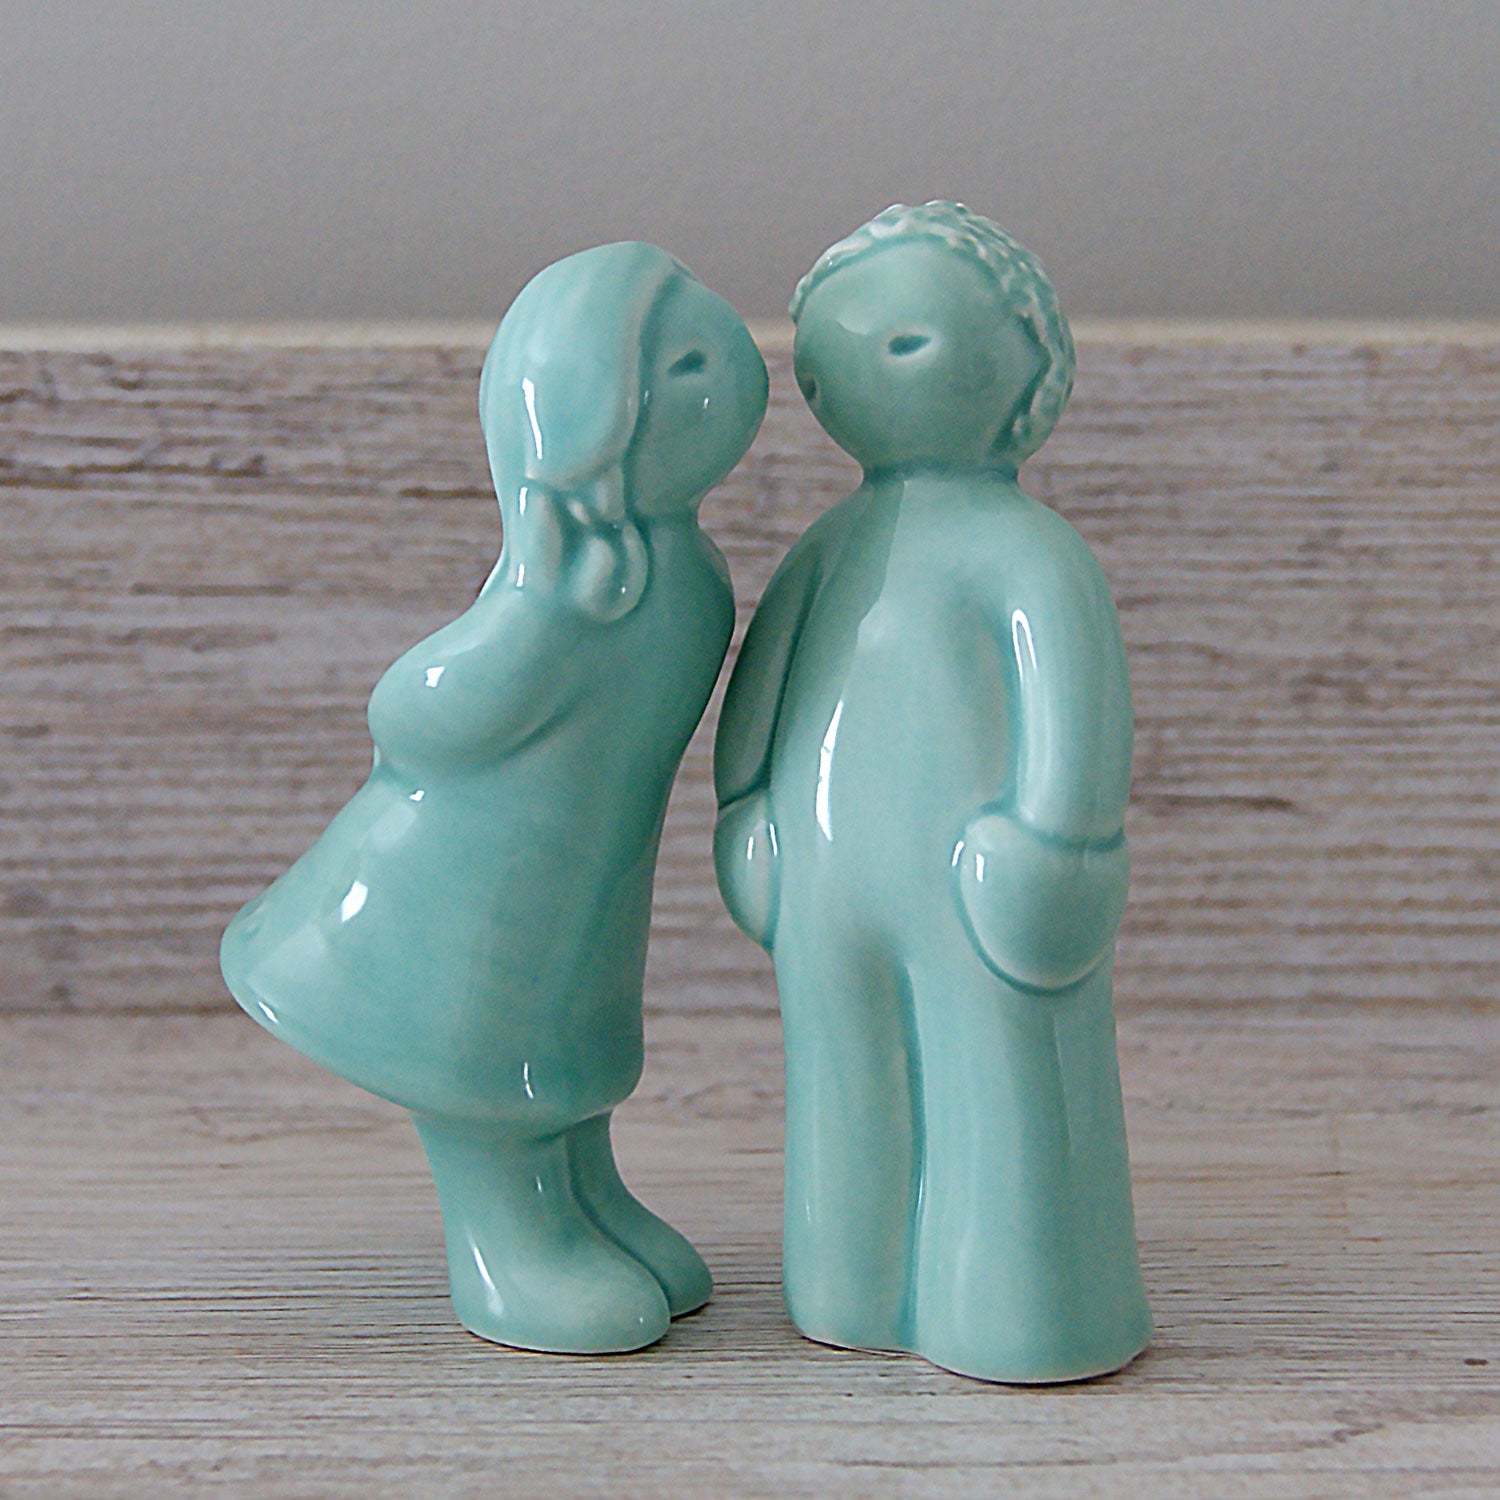 100% made in Portugal, using sustainable materials, these figurines  will find the heart of that special person and fill it with happiness. It represents, in the most tender and sweet way a constant reminder of the love and care you have for that special someone, and a keepsake memory of that first kiss.